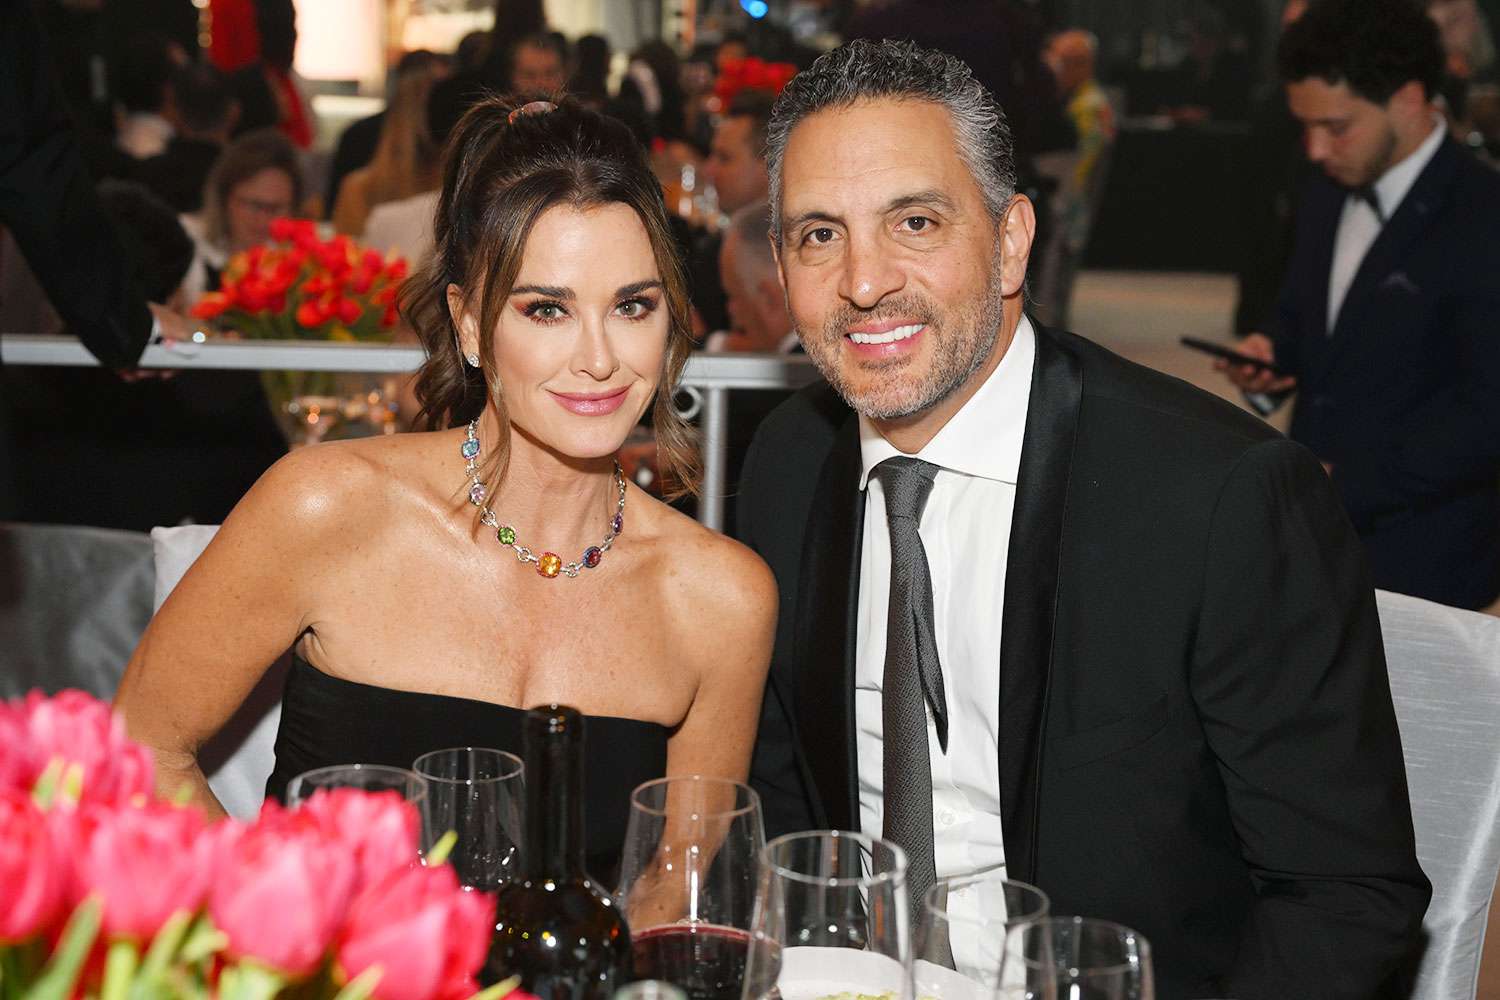 Real Housewives Star Kyle Richards And Mauricio Umansky Reportedly Do Not Have A Prenup